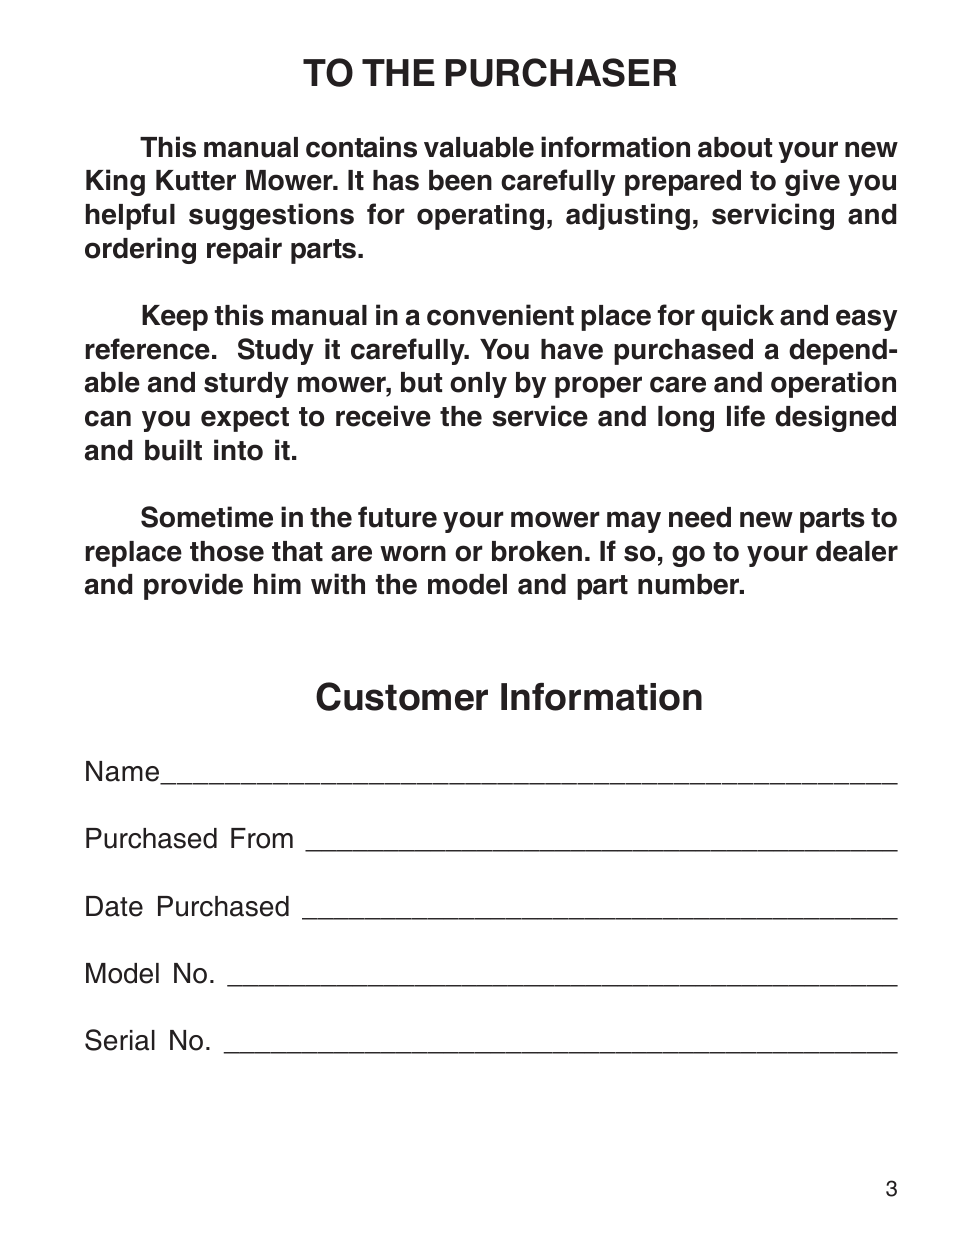 Customer information | King Kutter Rotary Mower User Manual | Page 3 / 46